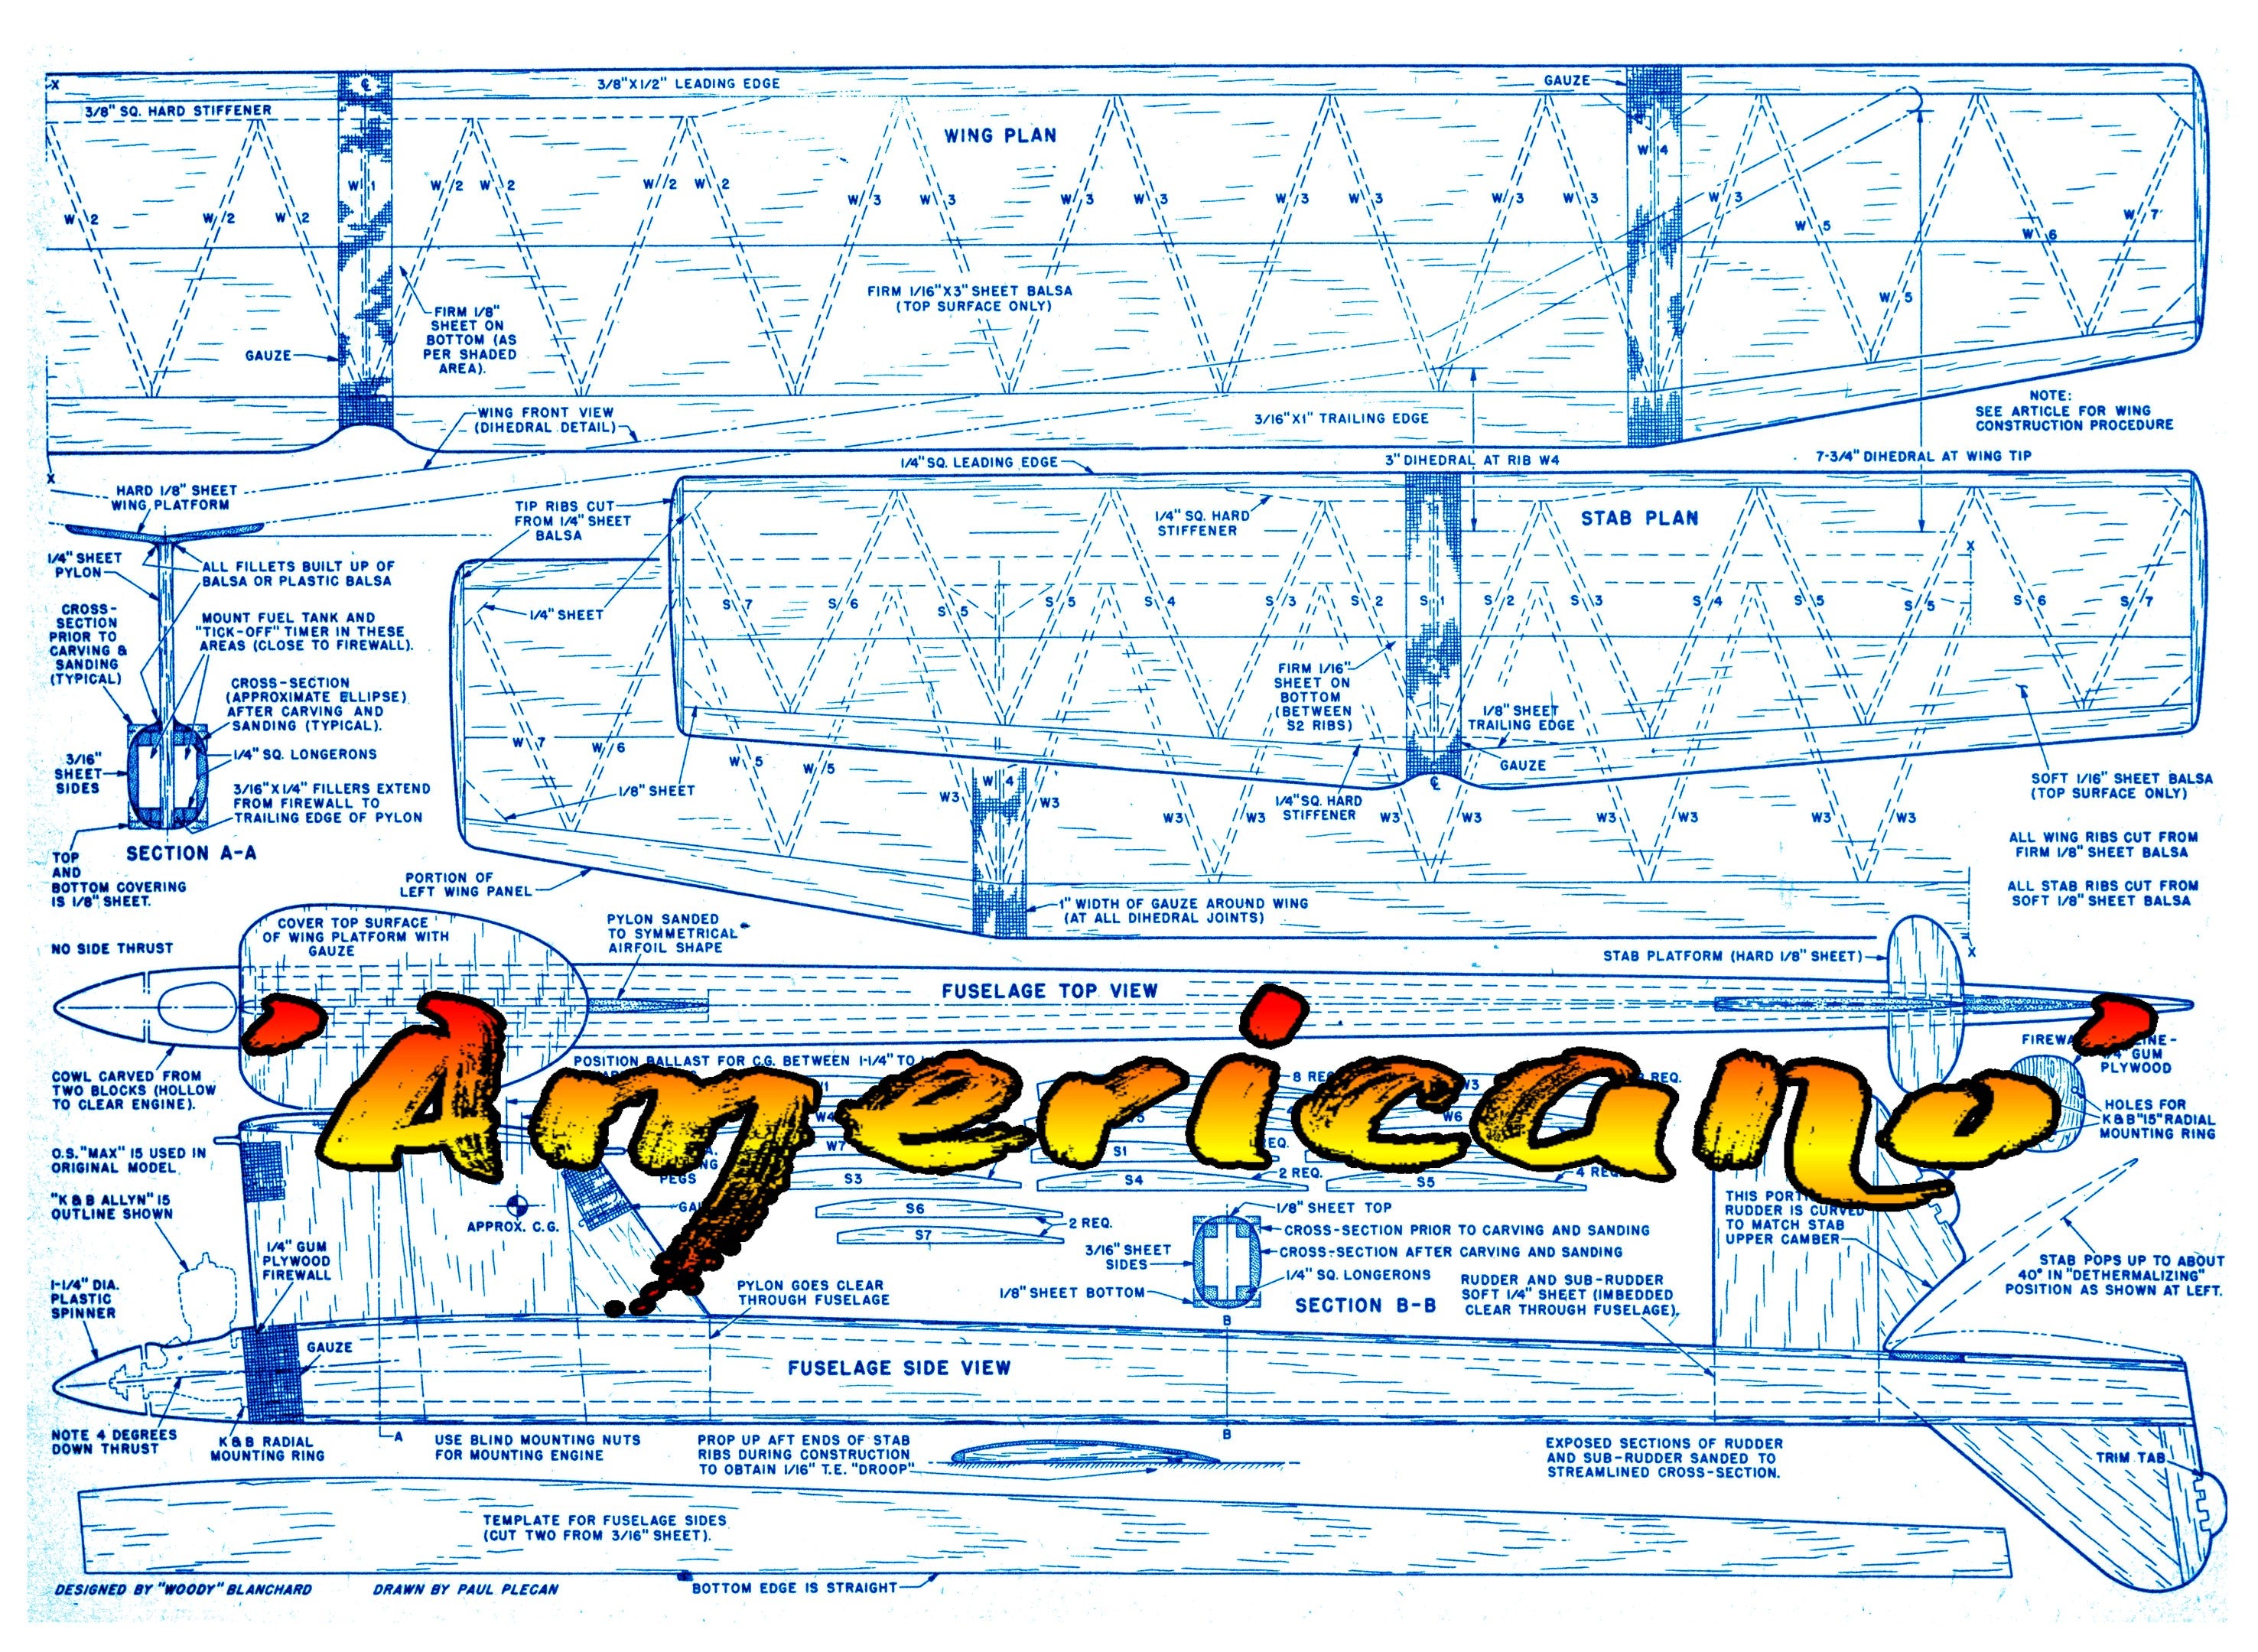 full size printed plan free flight .15 competition 'americano’ rugged, fine performer